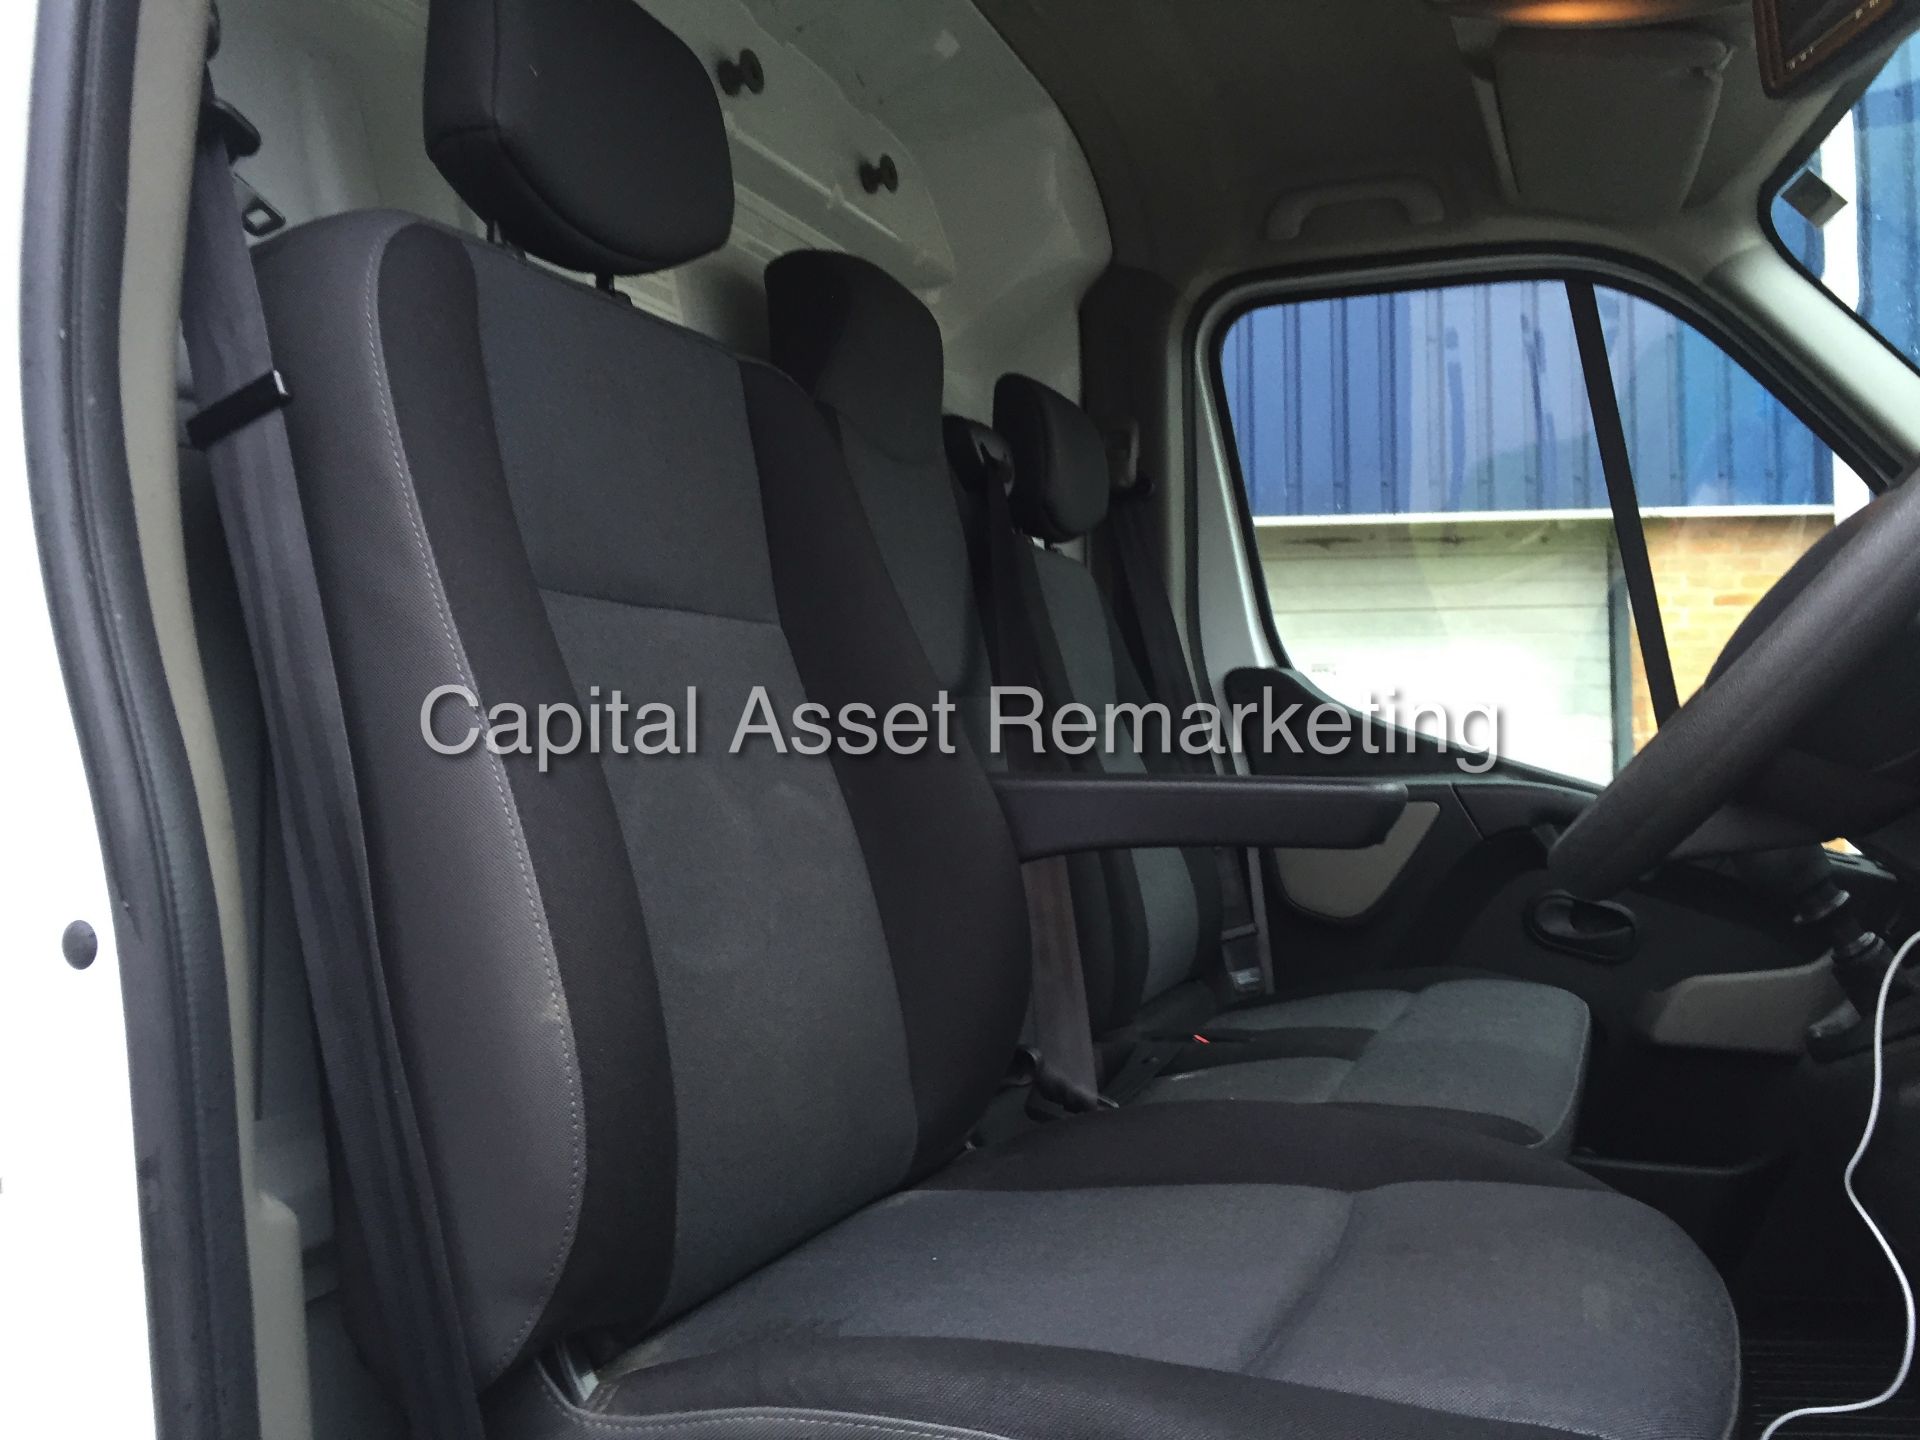 (ON SALE) RENAULT MASTER LM35 'EXTRA' (2014 - 14 REG) 2.3 DCI - 6 SPEED - AIR CON  (1 COMPANY OWNER) - Image 11 of 16